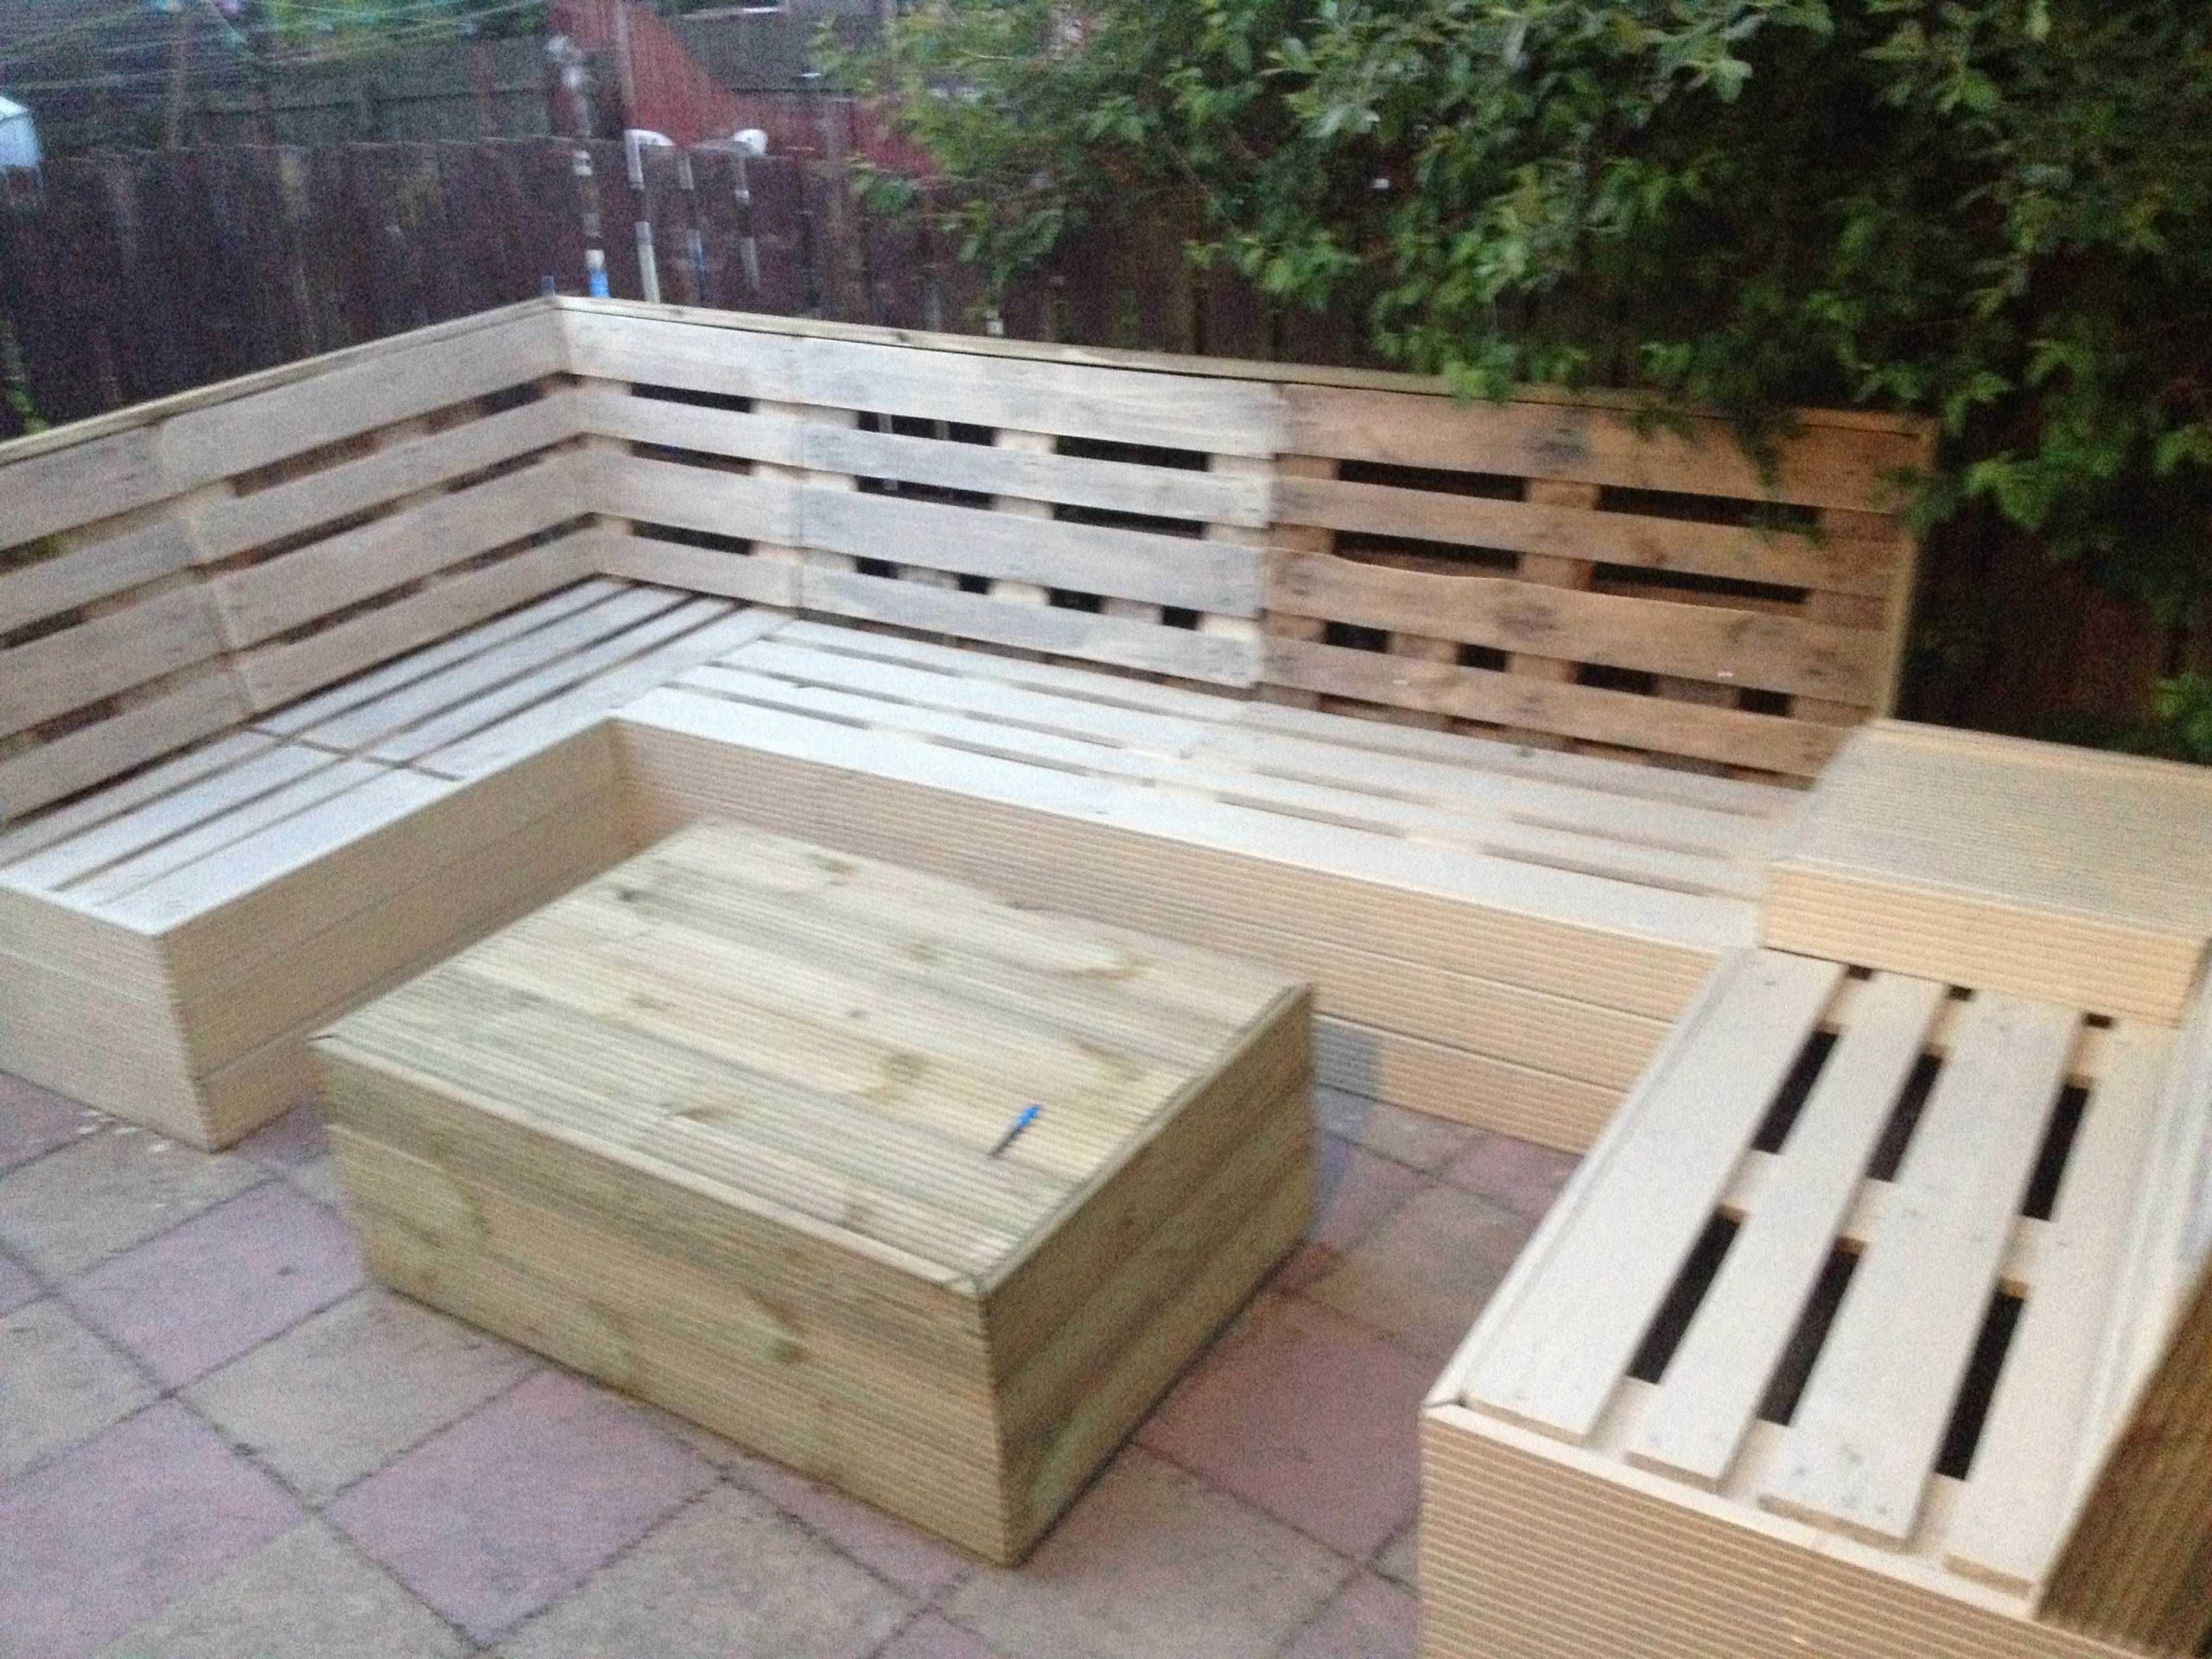 Pallet Backyard Furniture
 Unique and Awesome Pallet Garden Furniture – Ideas with